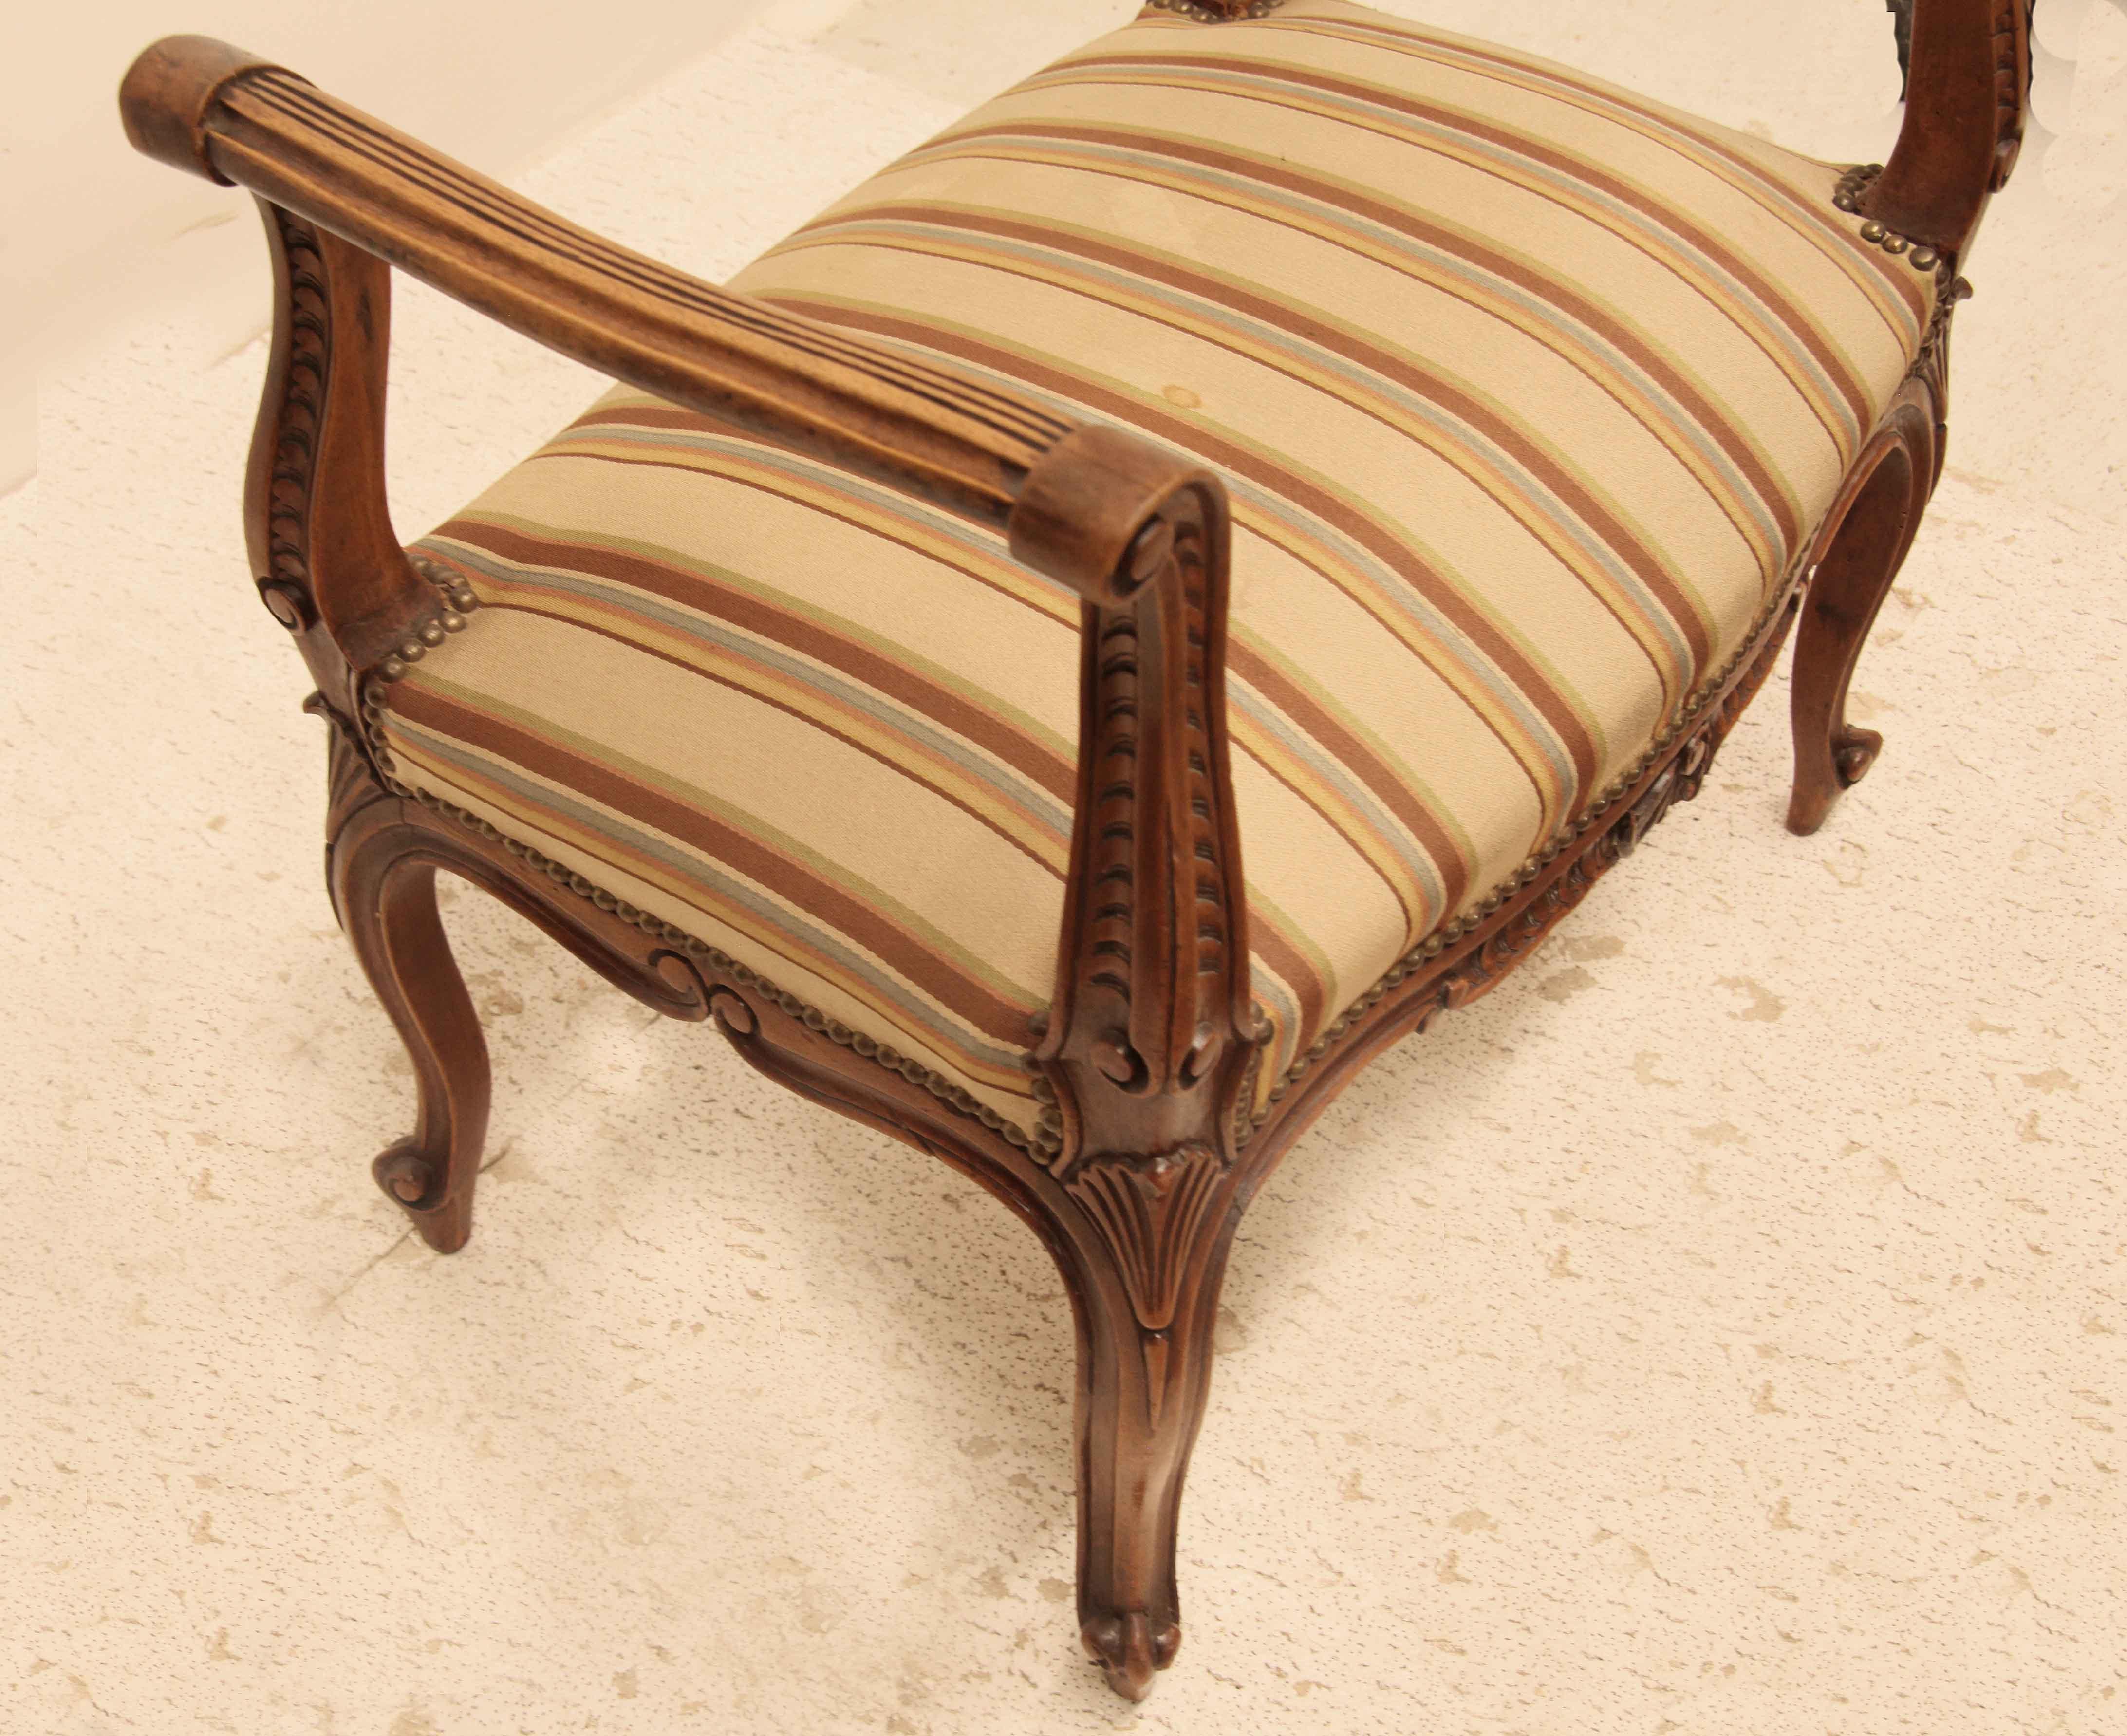 French upholstered window bench, this four sided bench has cabriole shaped arms with detailed carving , the serpentine apron and sides have similar carving ; cabriole legs with stylized shell on the knee tapering to a scrolled foot.  